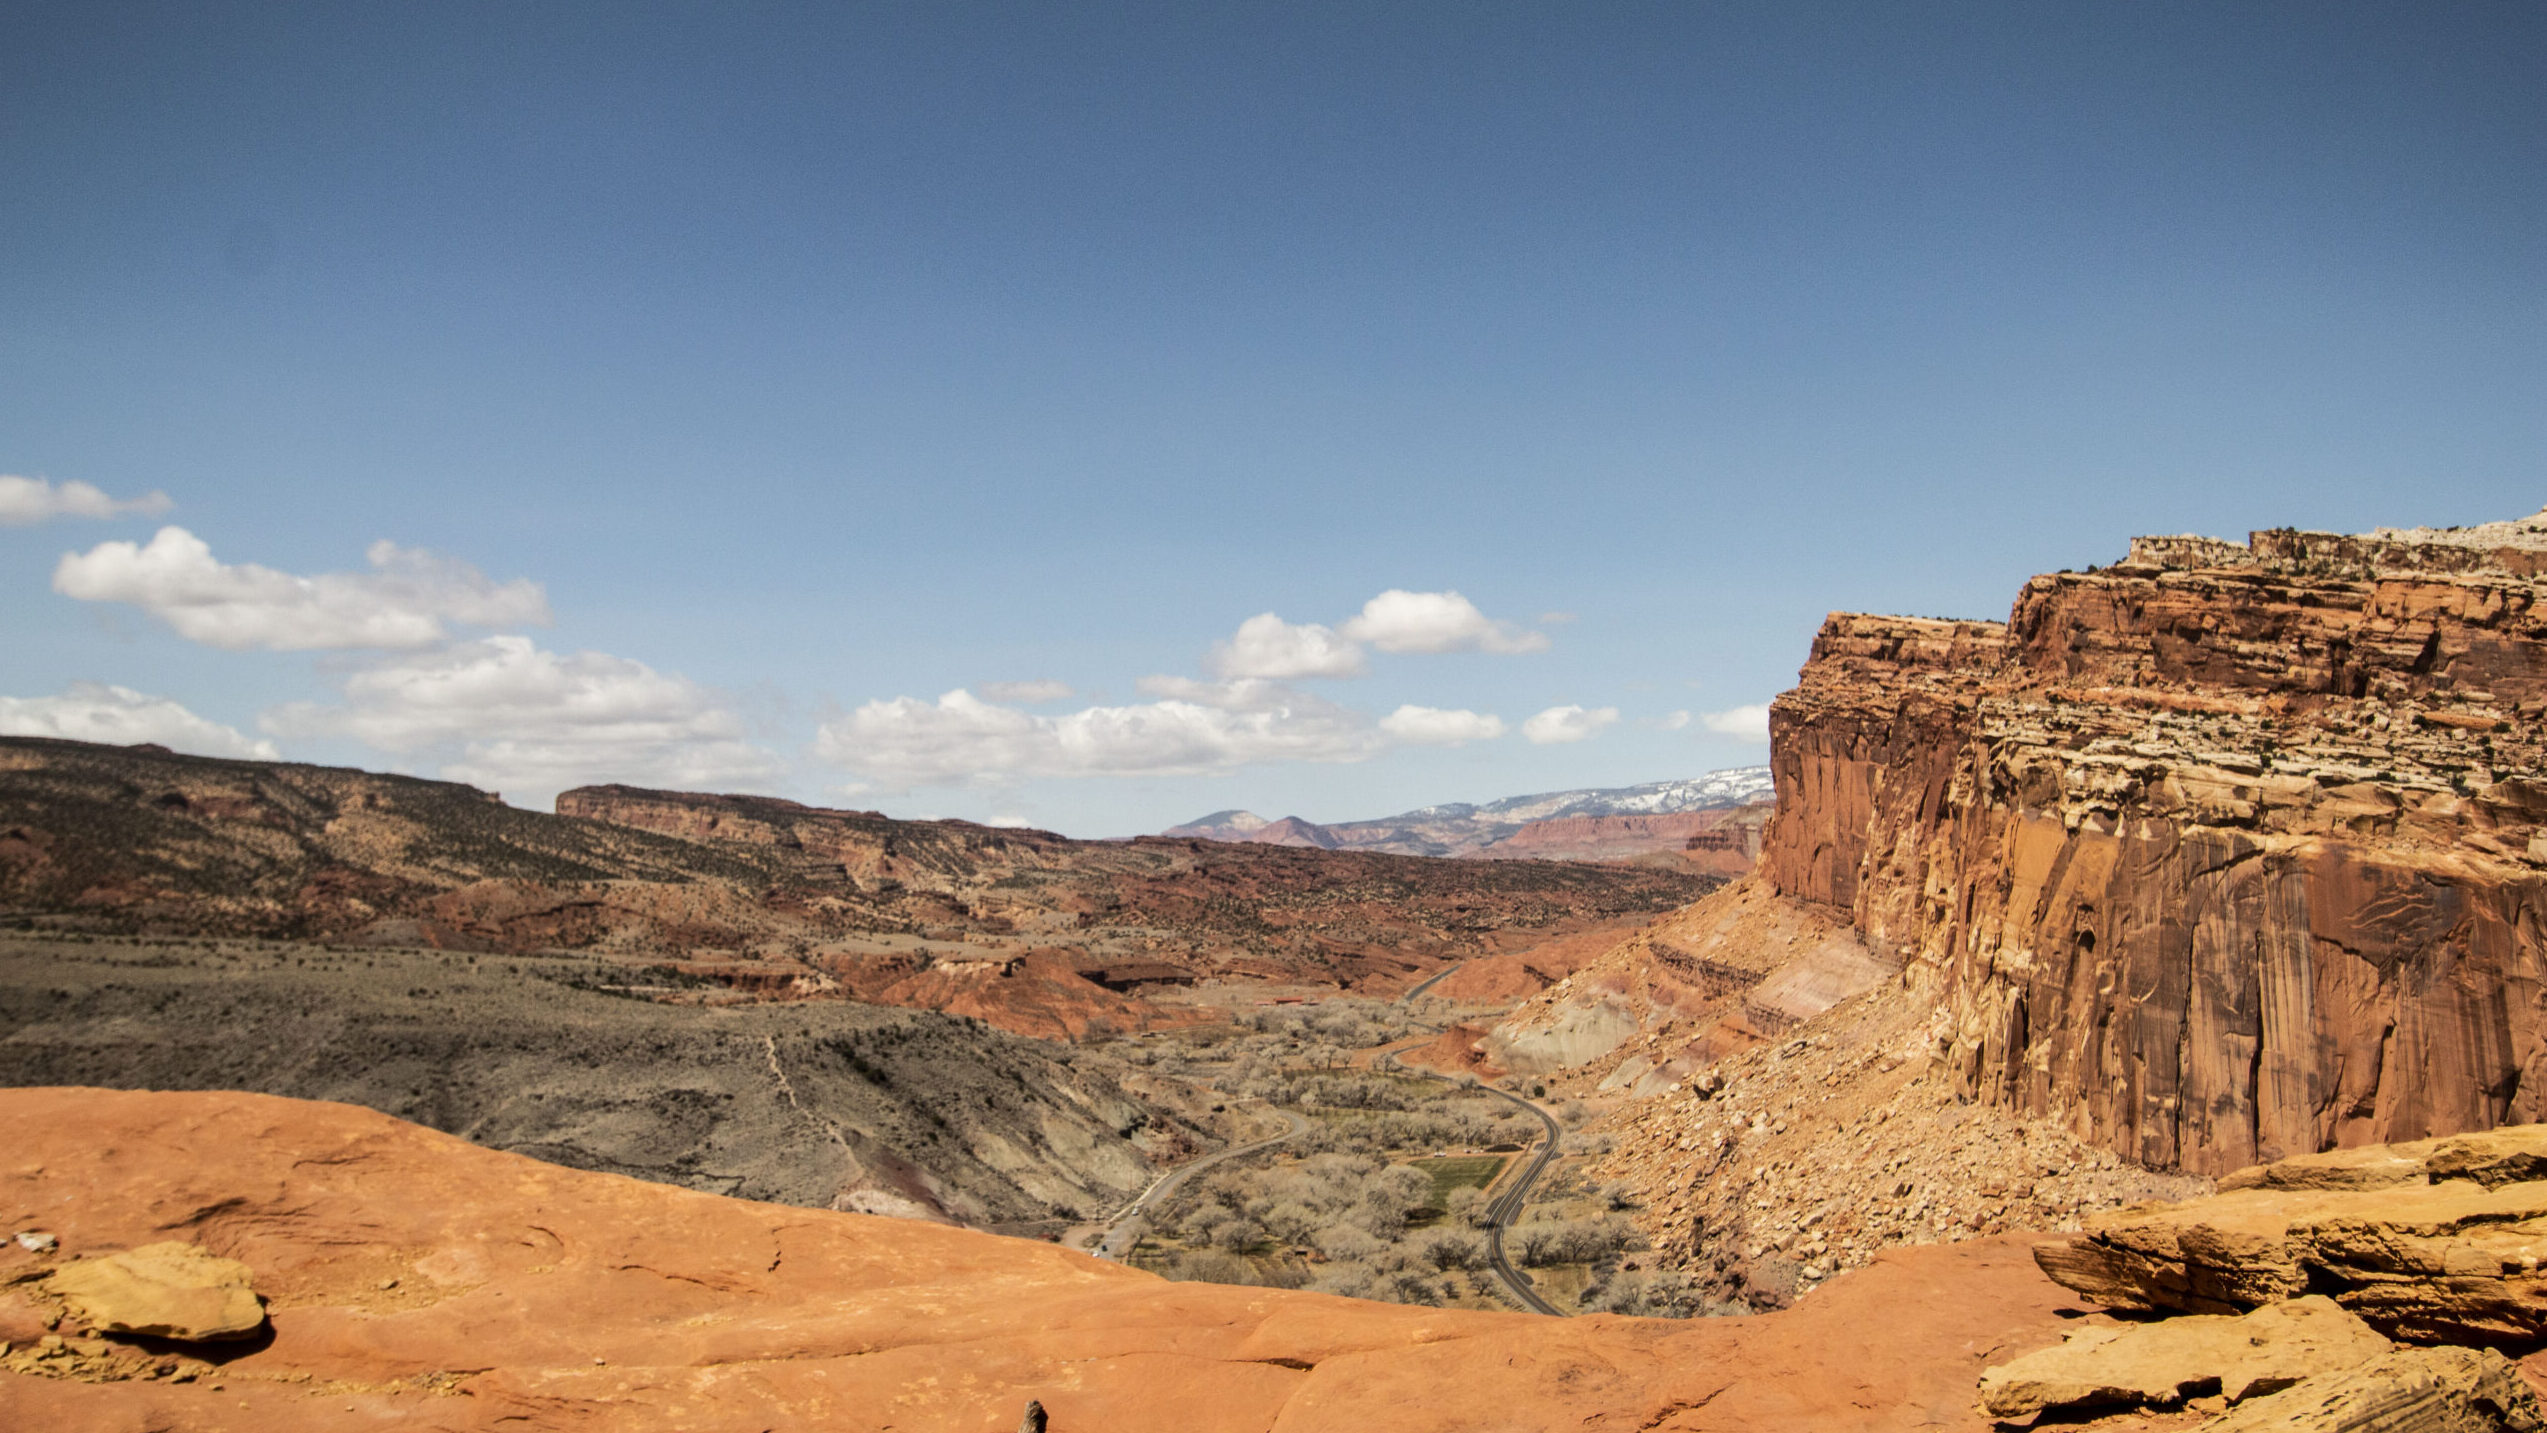 The view from the South Fruita Overlook in Capitol Reef National Park. Fruita is one of the many sp...